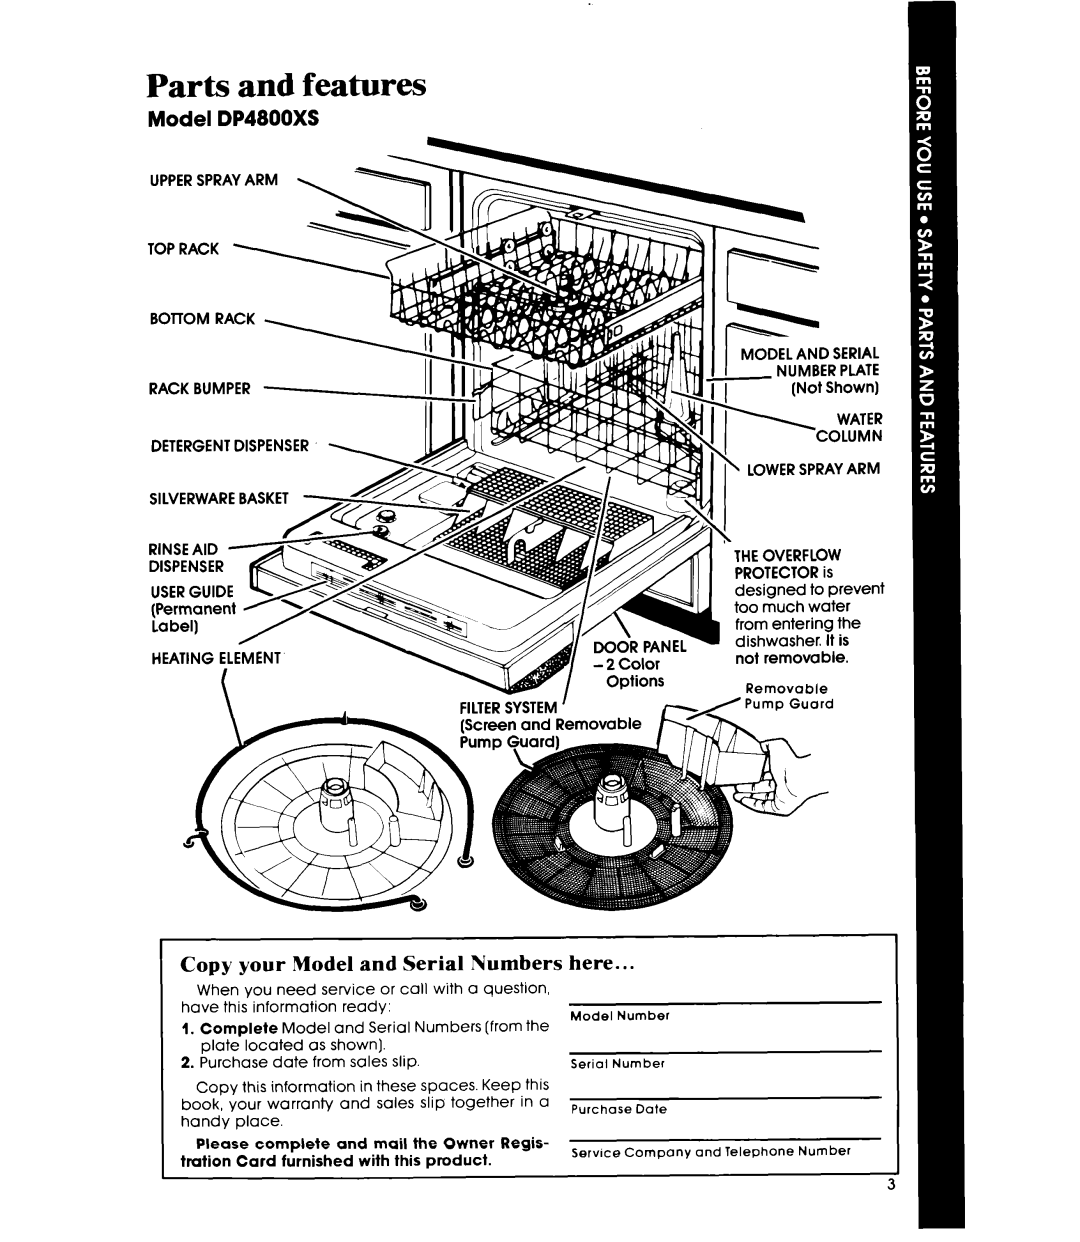 Whirlpool manual Parts and features, Model DP4800XS, Copy your Model and Serial Numbers, here 